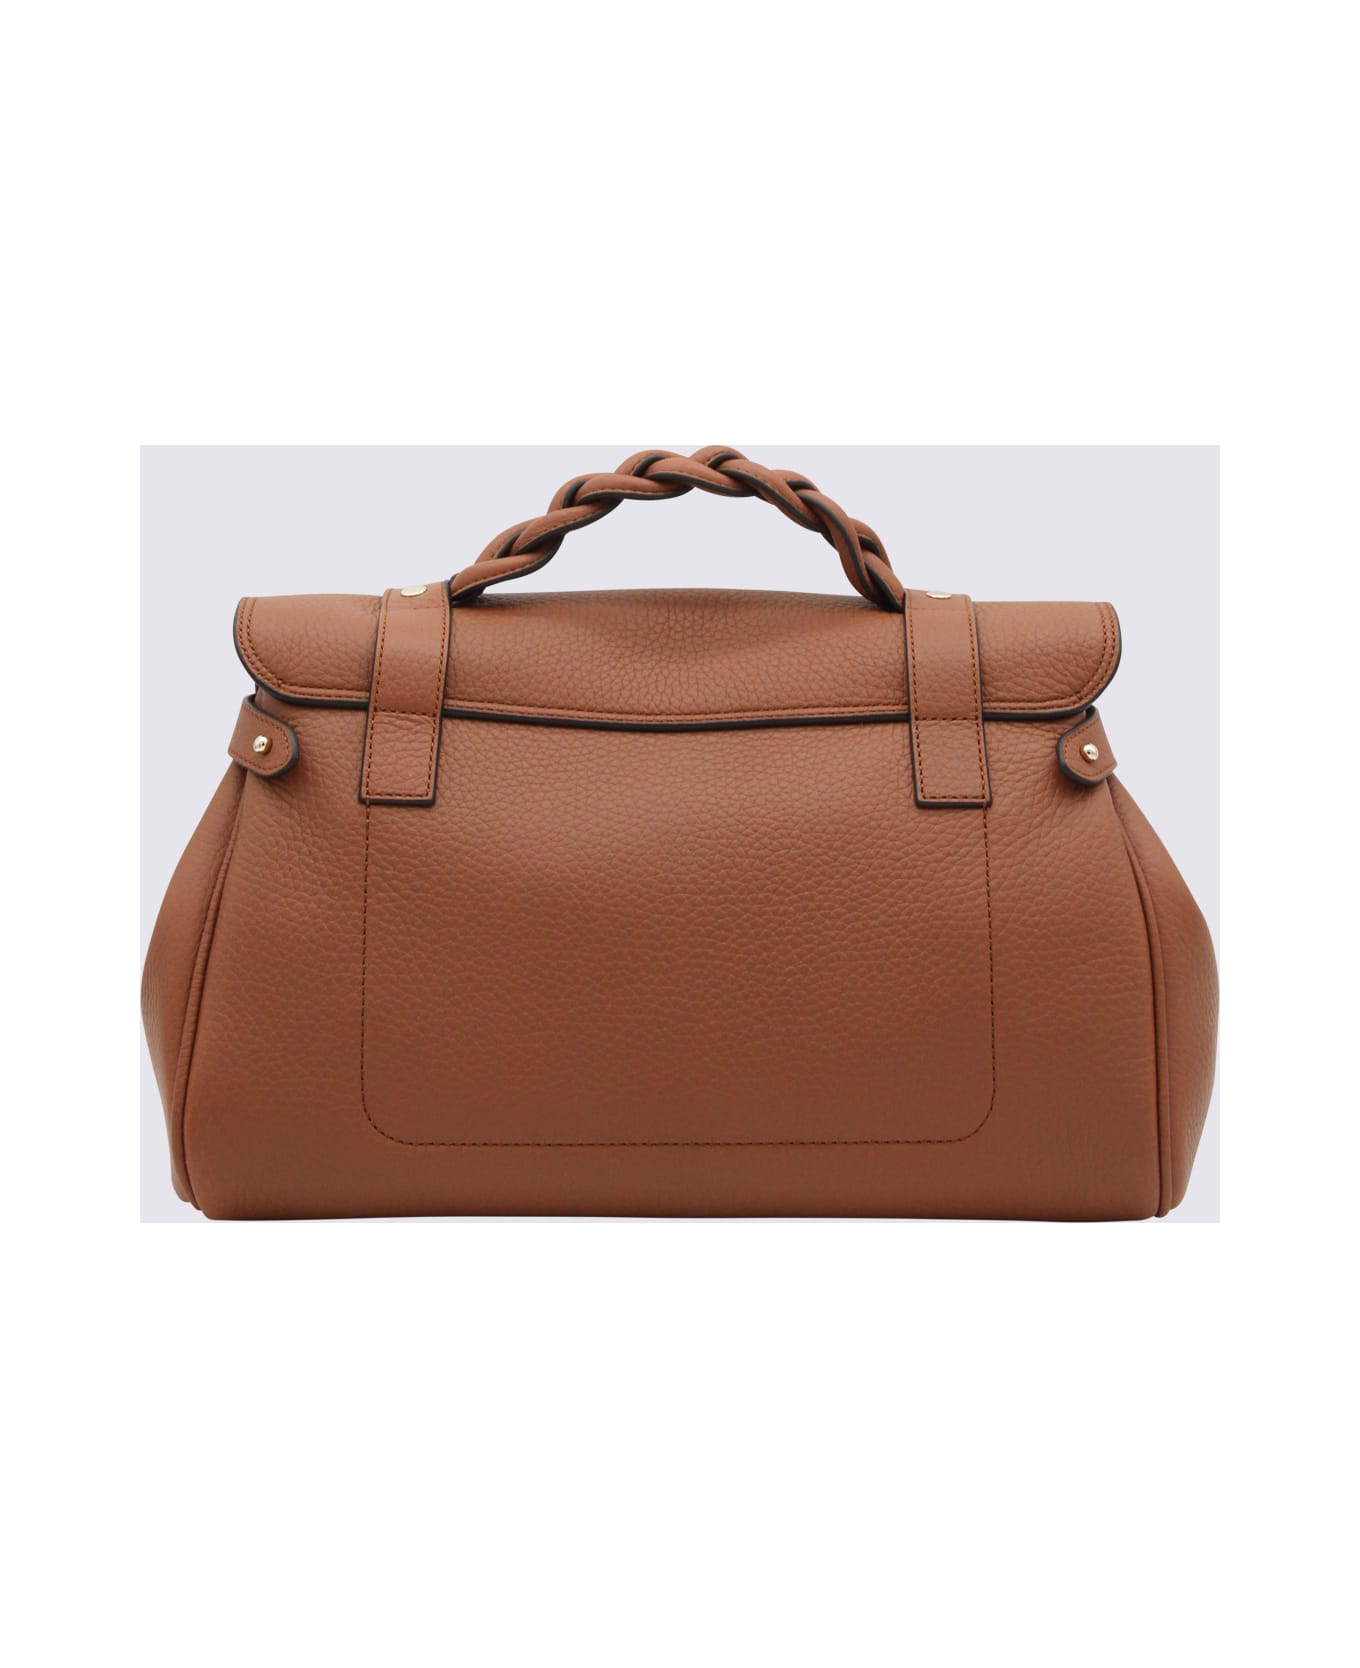 Mulberry Brown Leather Alexa Handle Bag - Chestnut